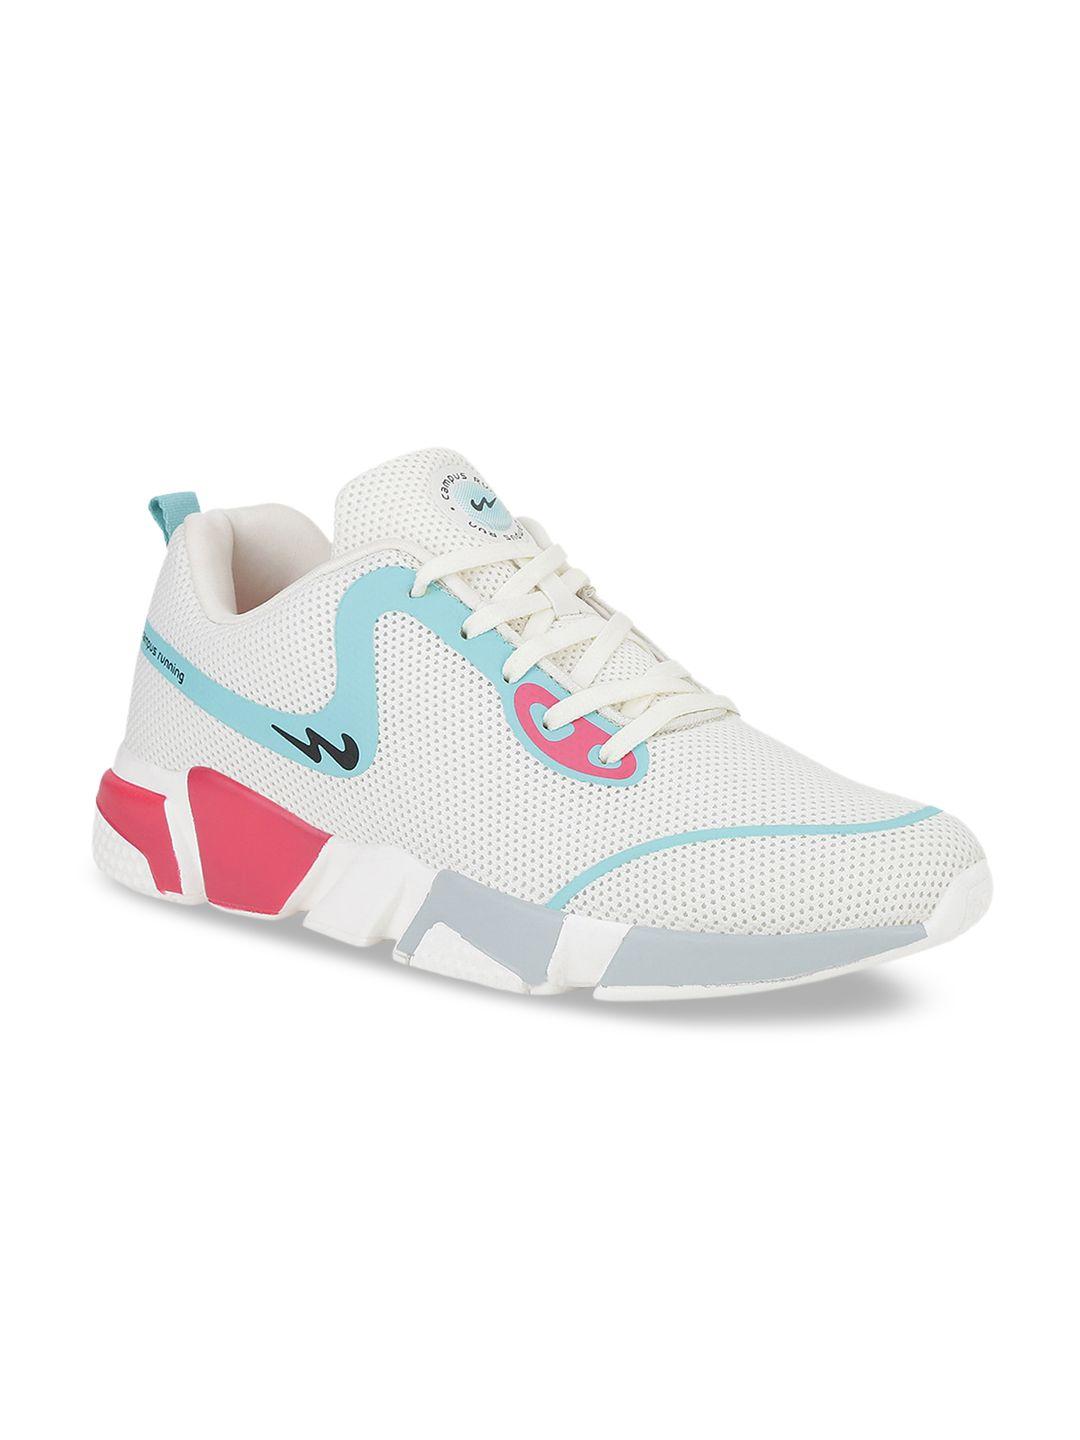 campus women off-white mesh running shoes